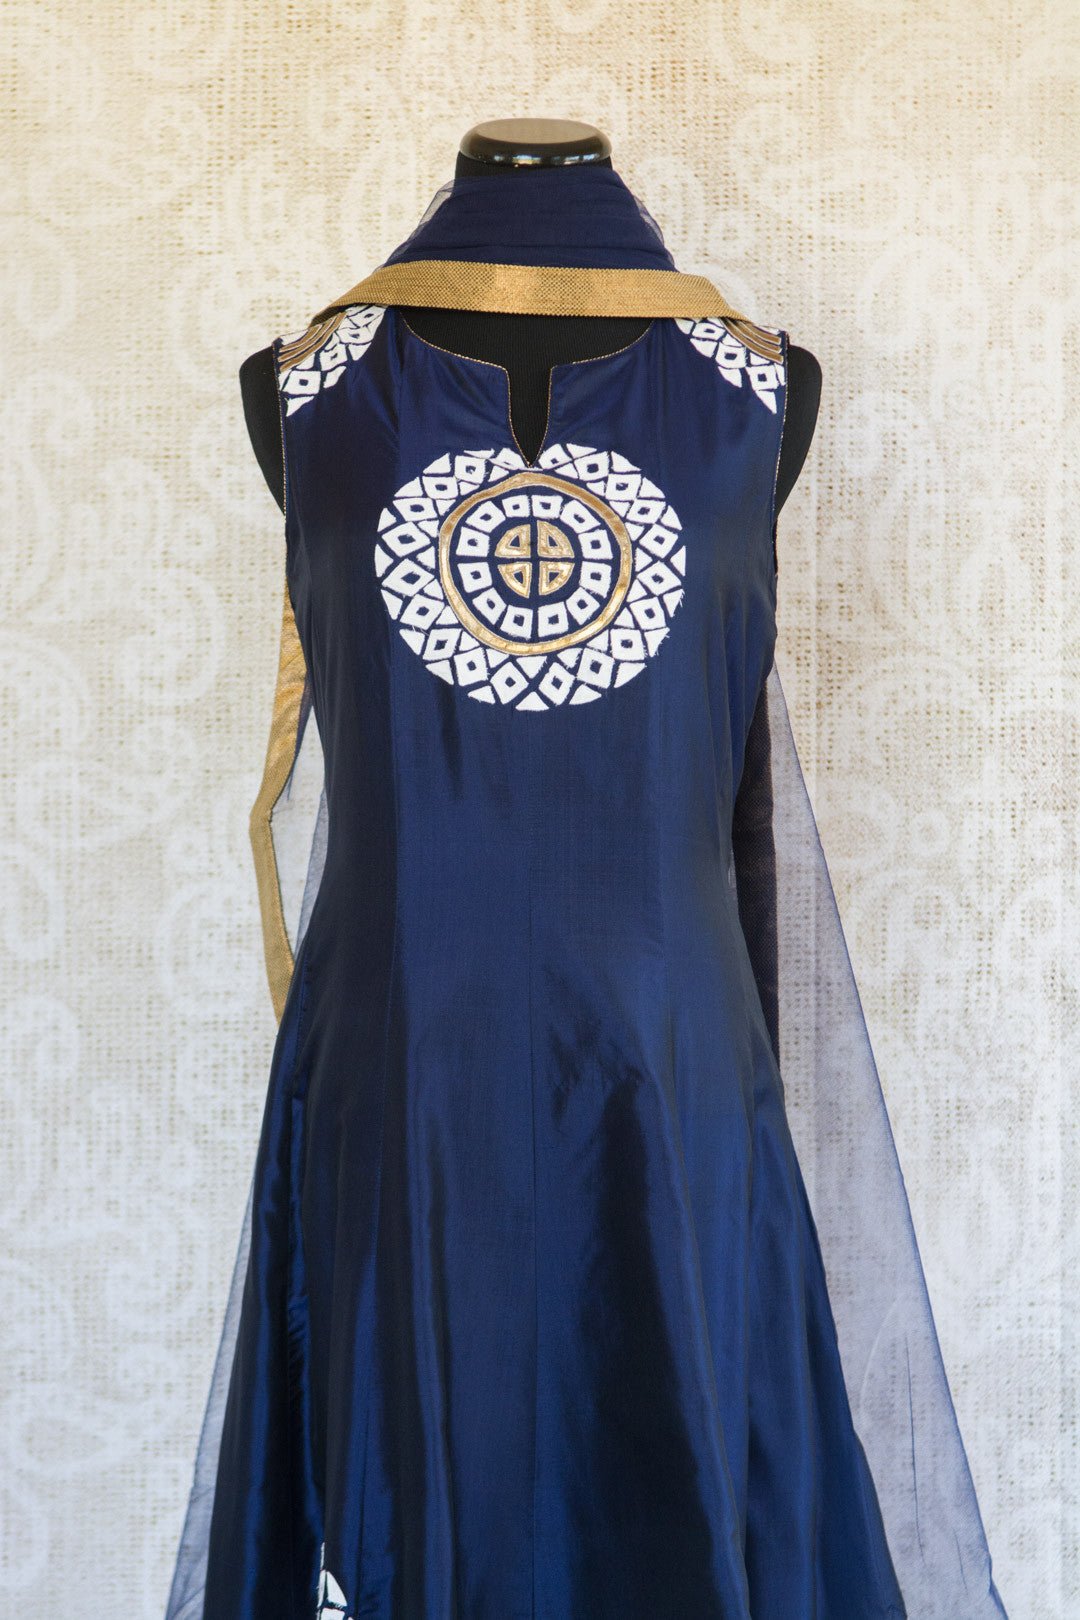 501087-suit-sleeveless-dark-blue-white-gold-circles-embroidered-scarf-top-view